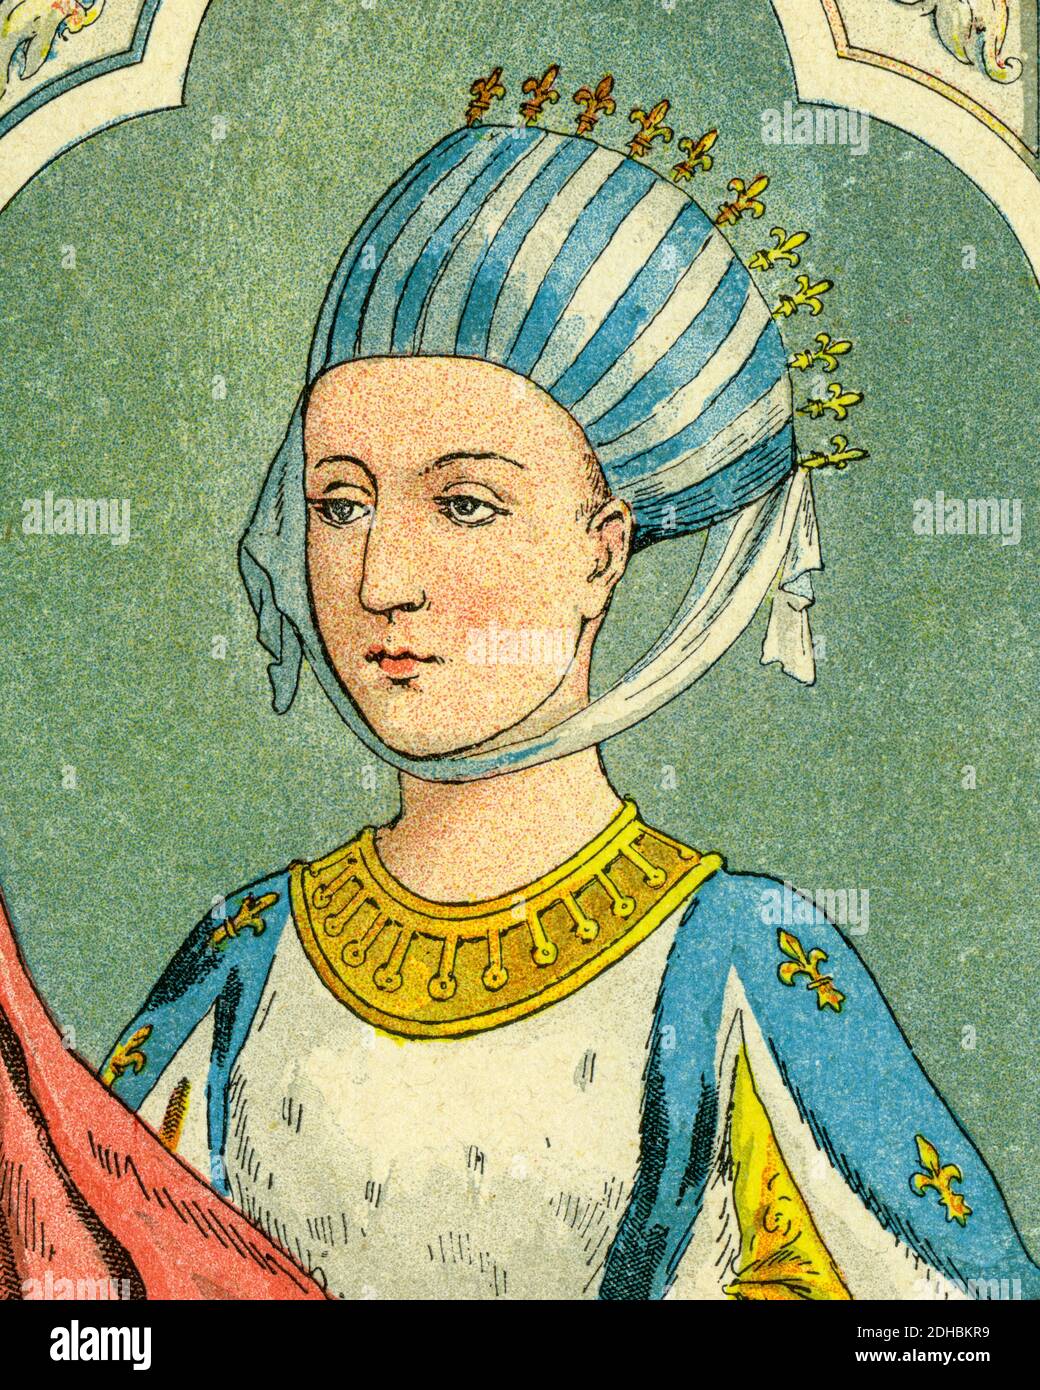 Old color lithography portrait of Margaret of Provence. Marguerite de Provence, Margarete von der Provence (1221-1295) Queen of France as the wife of King Louis IX. France. Les Français Illustres by Gustave Demoulin 1897 Stock Photo